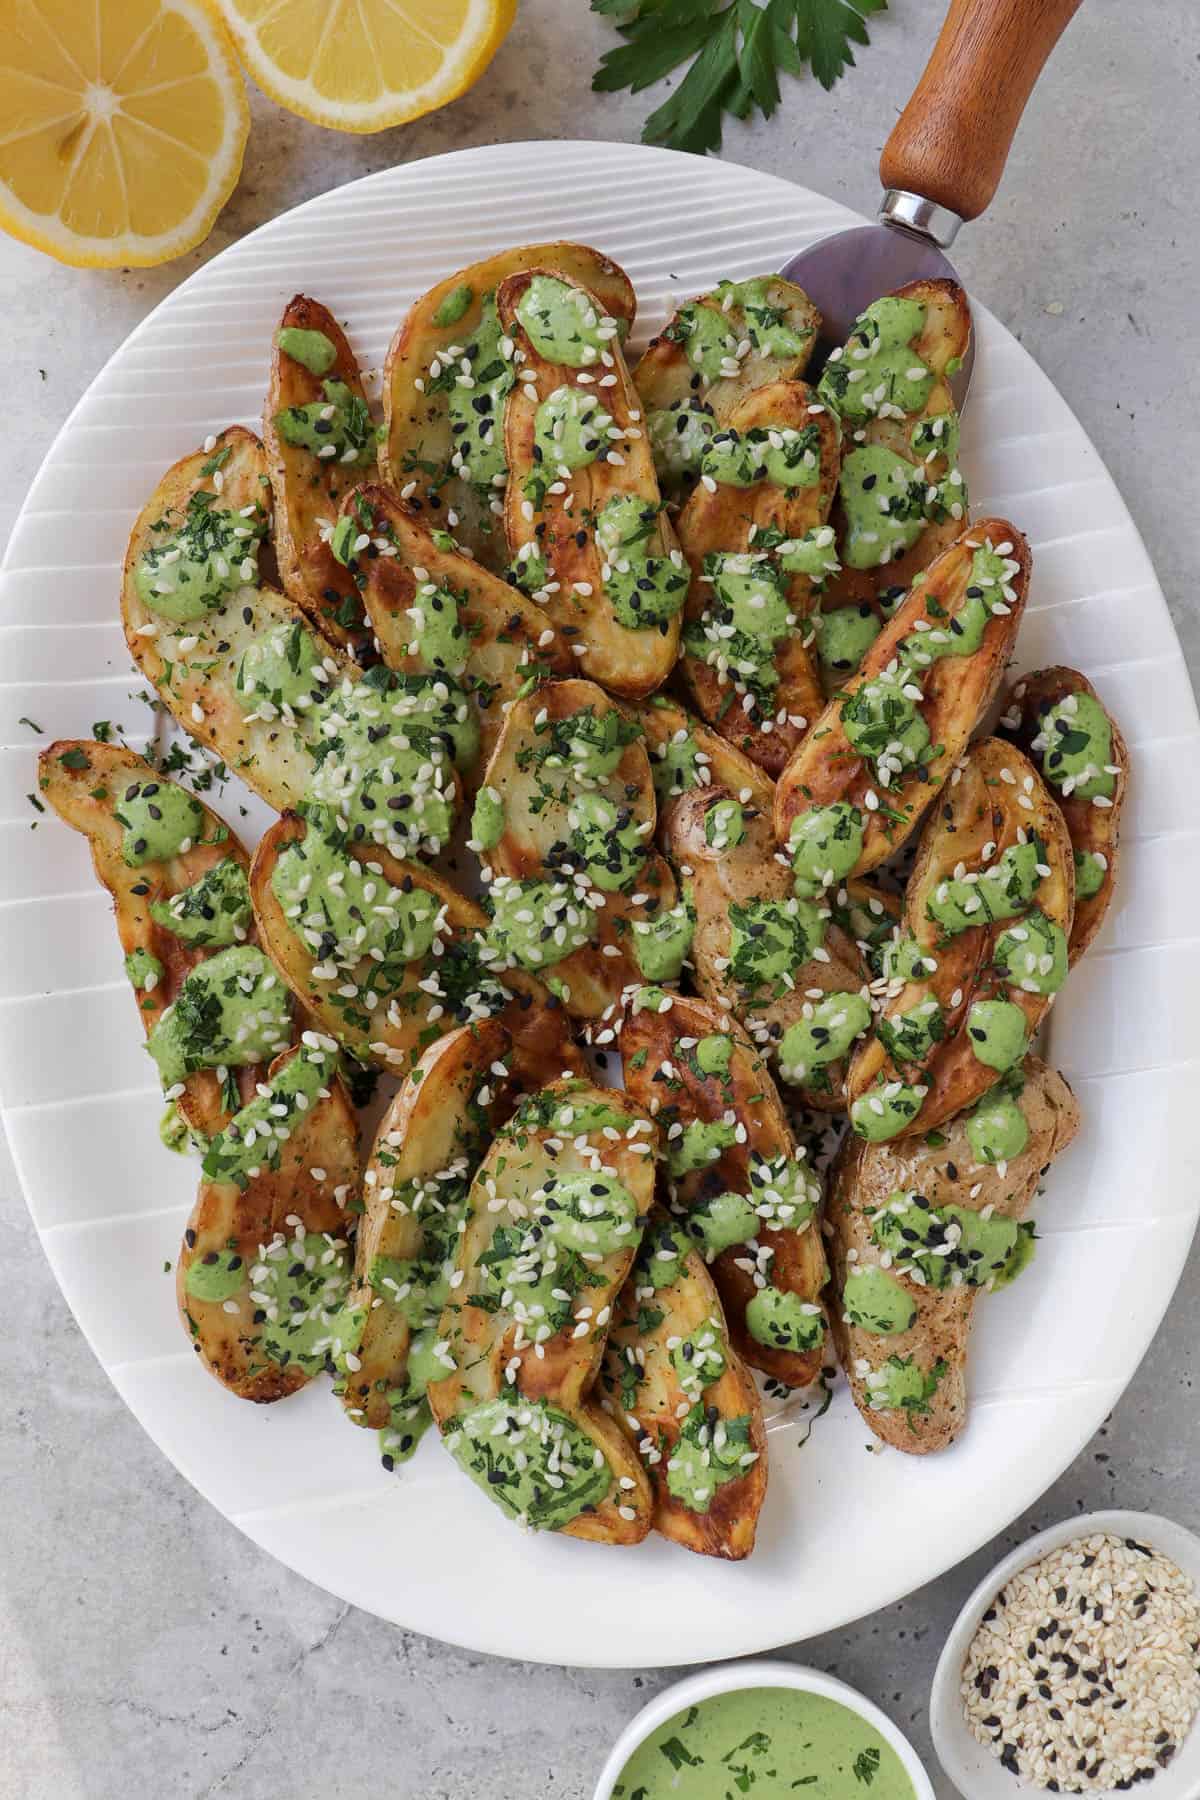 Air fryer fingerling potatoes on plate with green tahini sauce. Lemons, sauce, sesame seeds and parsley on the side.